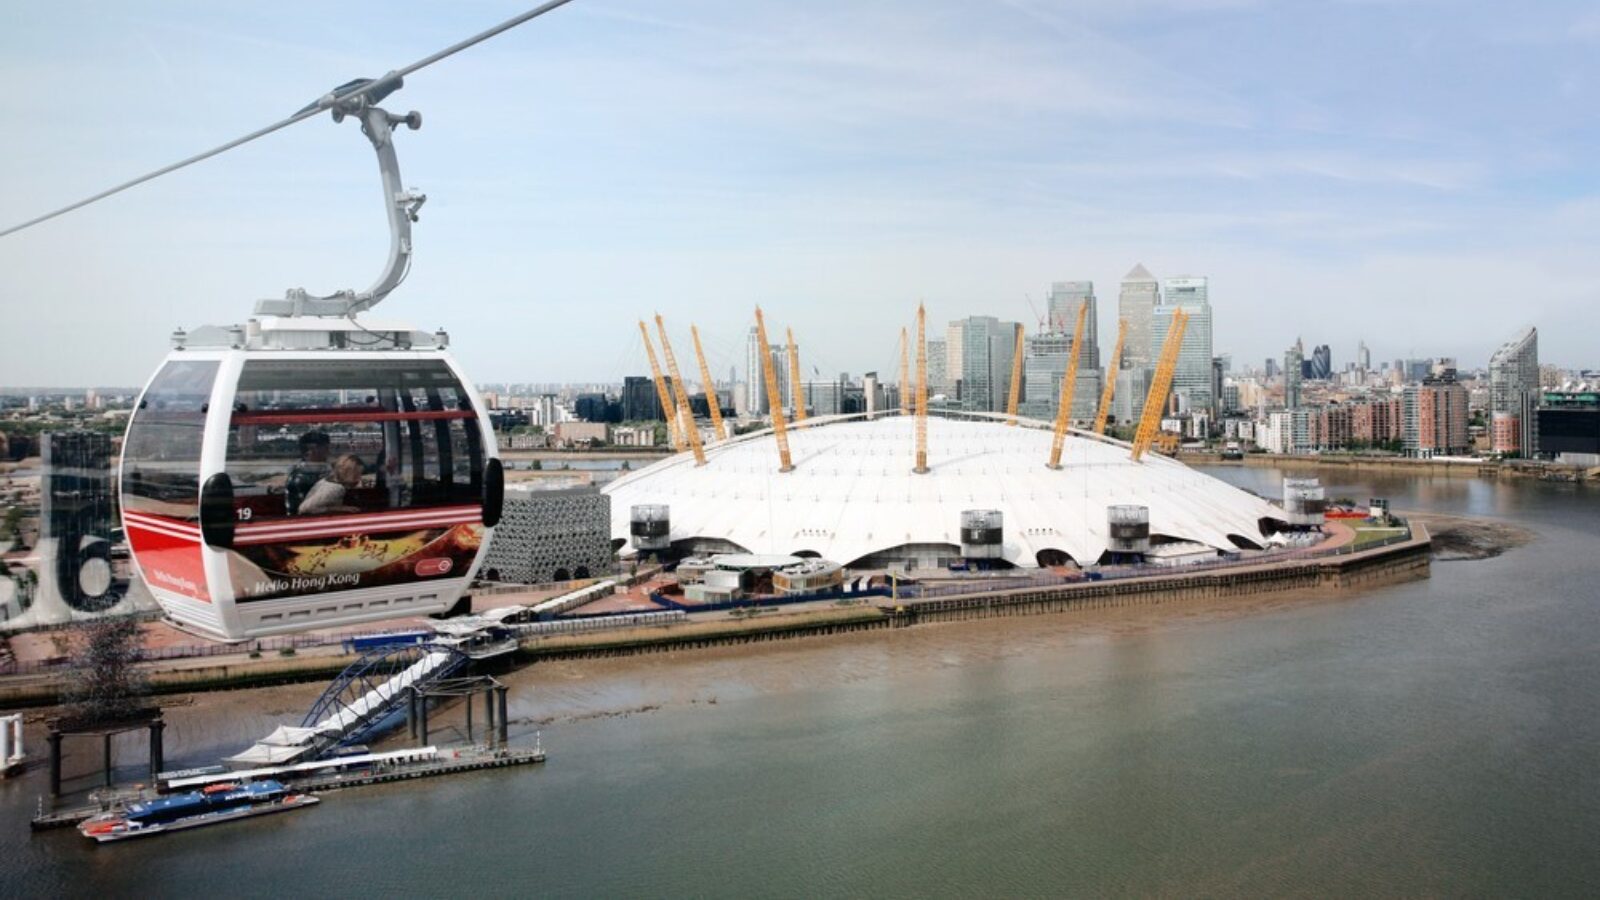 Aberdeen's FirstGroup wins £60m contract to run iconic London Cable Cars